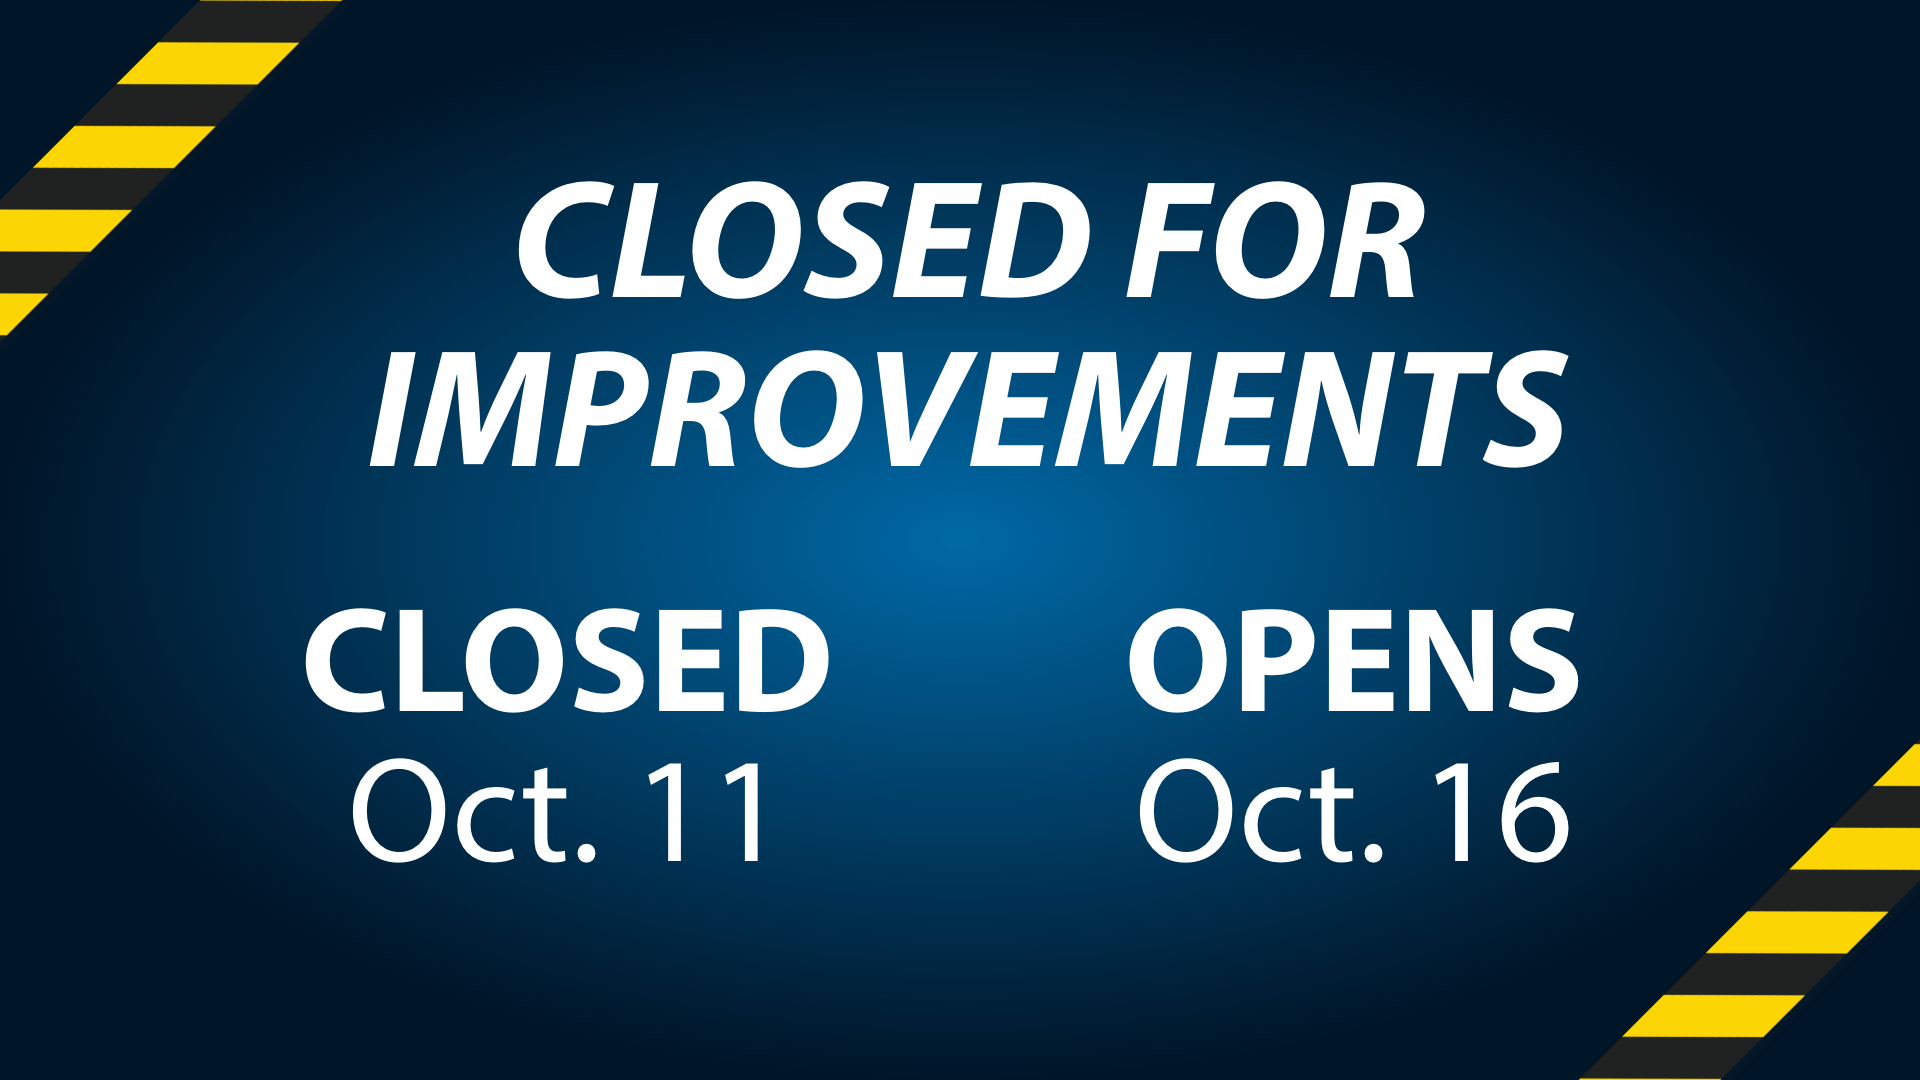 Closed for Improvements Oct. 11 - Oct. 15